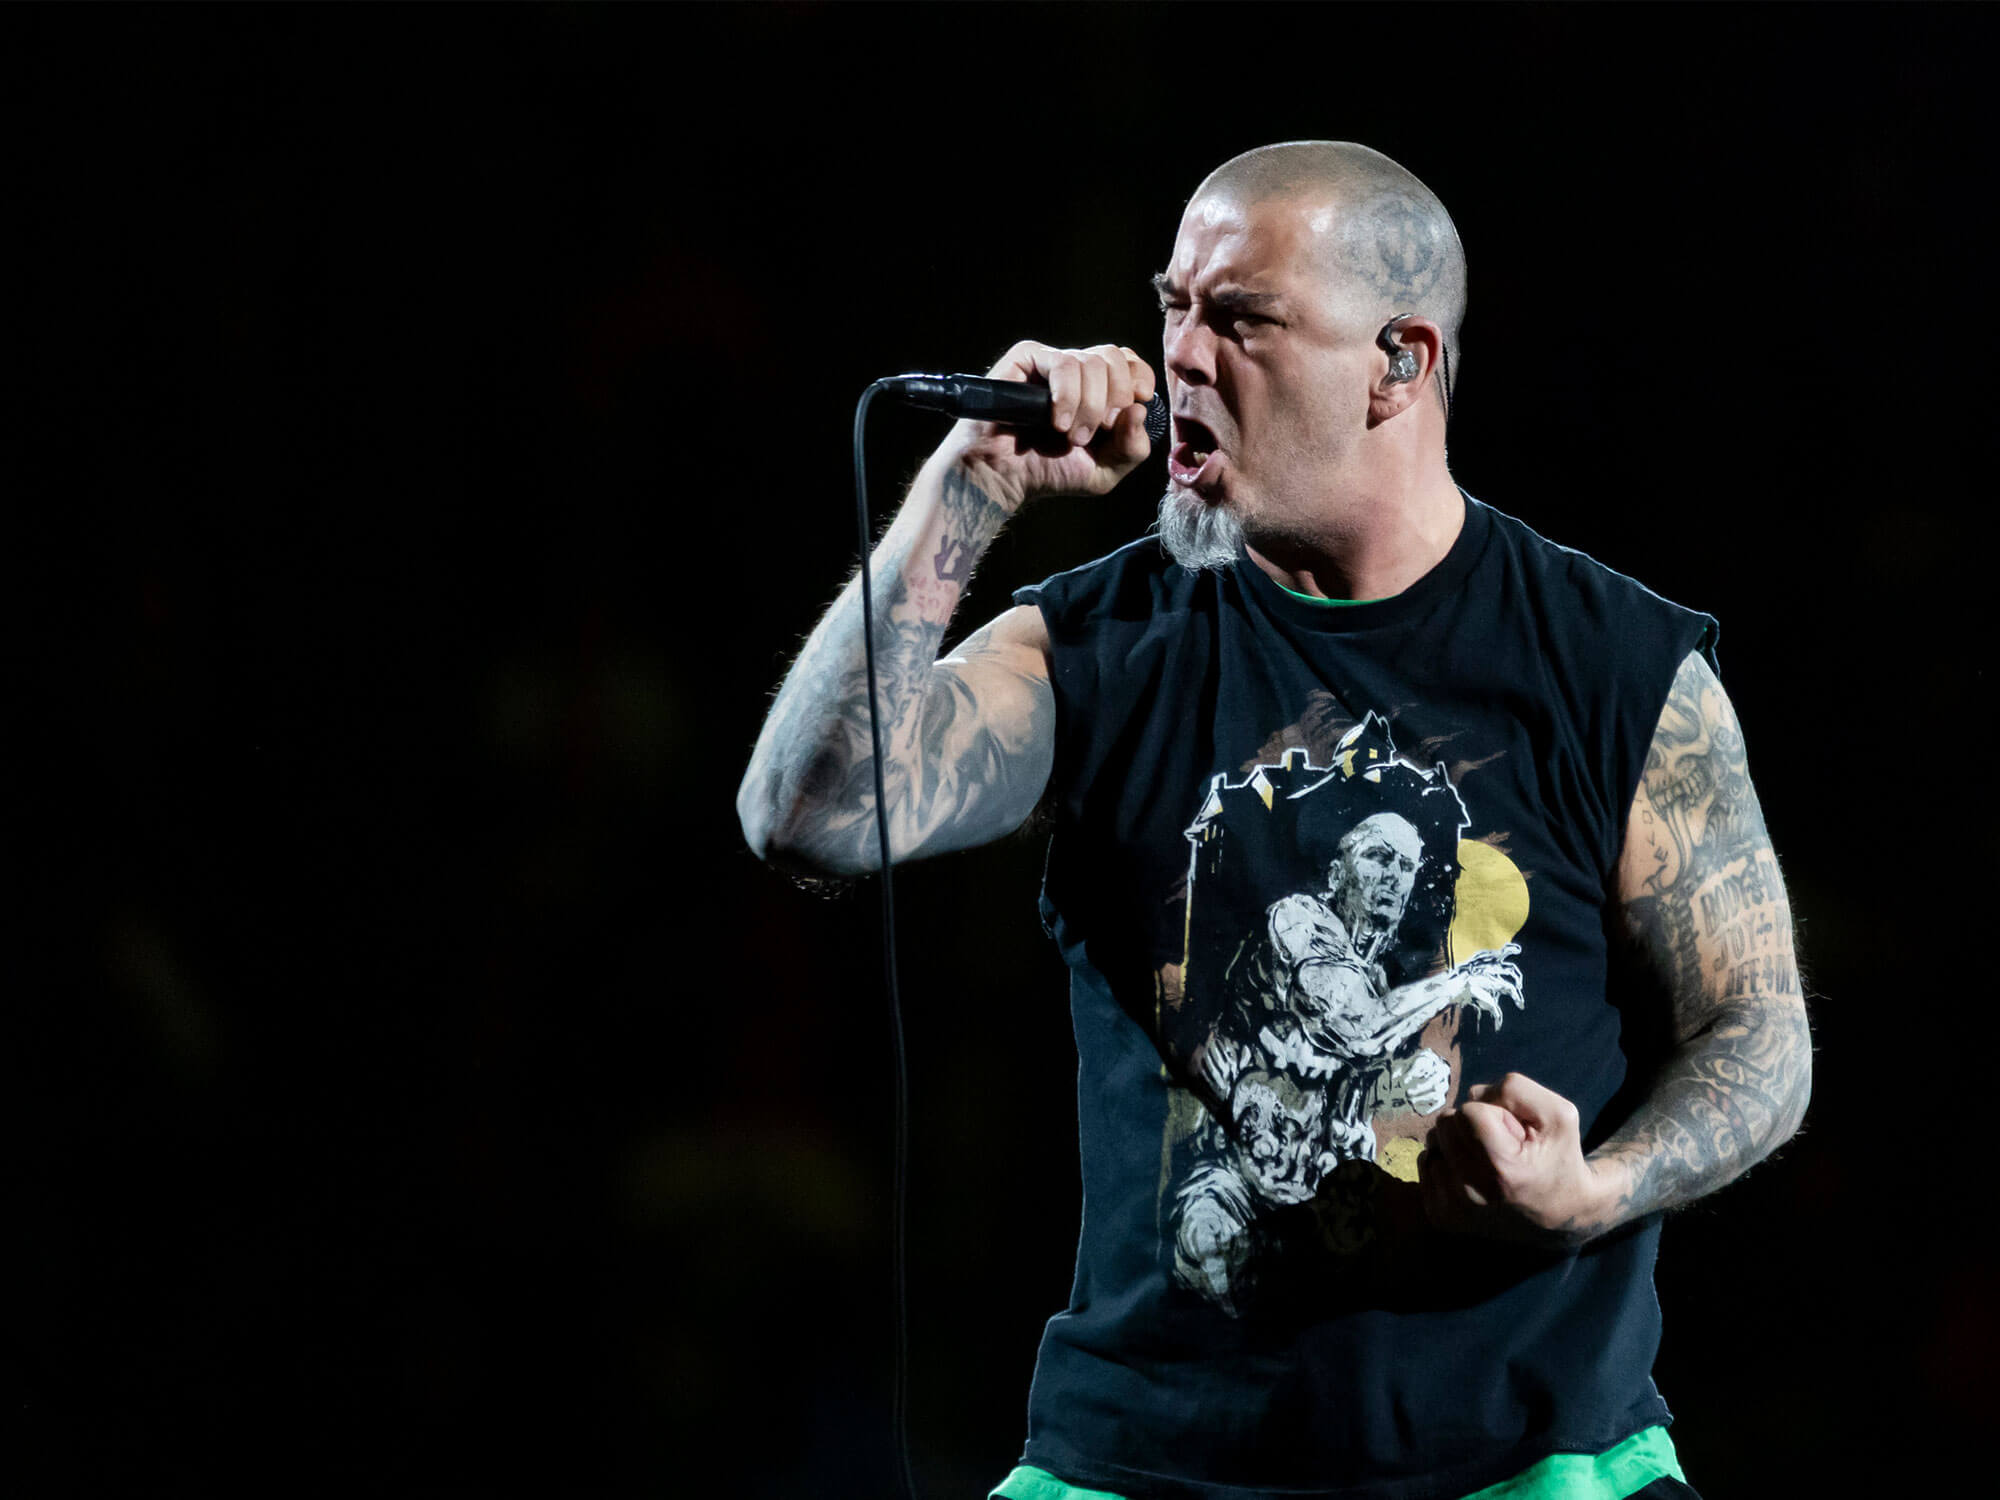 Phil Anselmo performing live